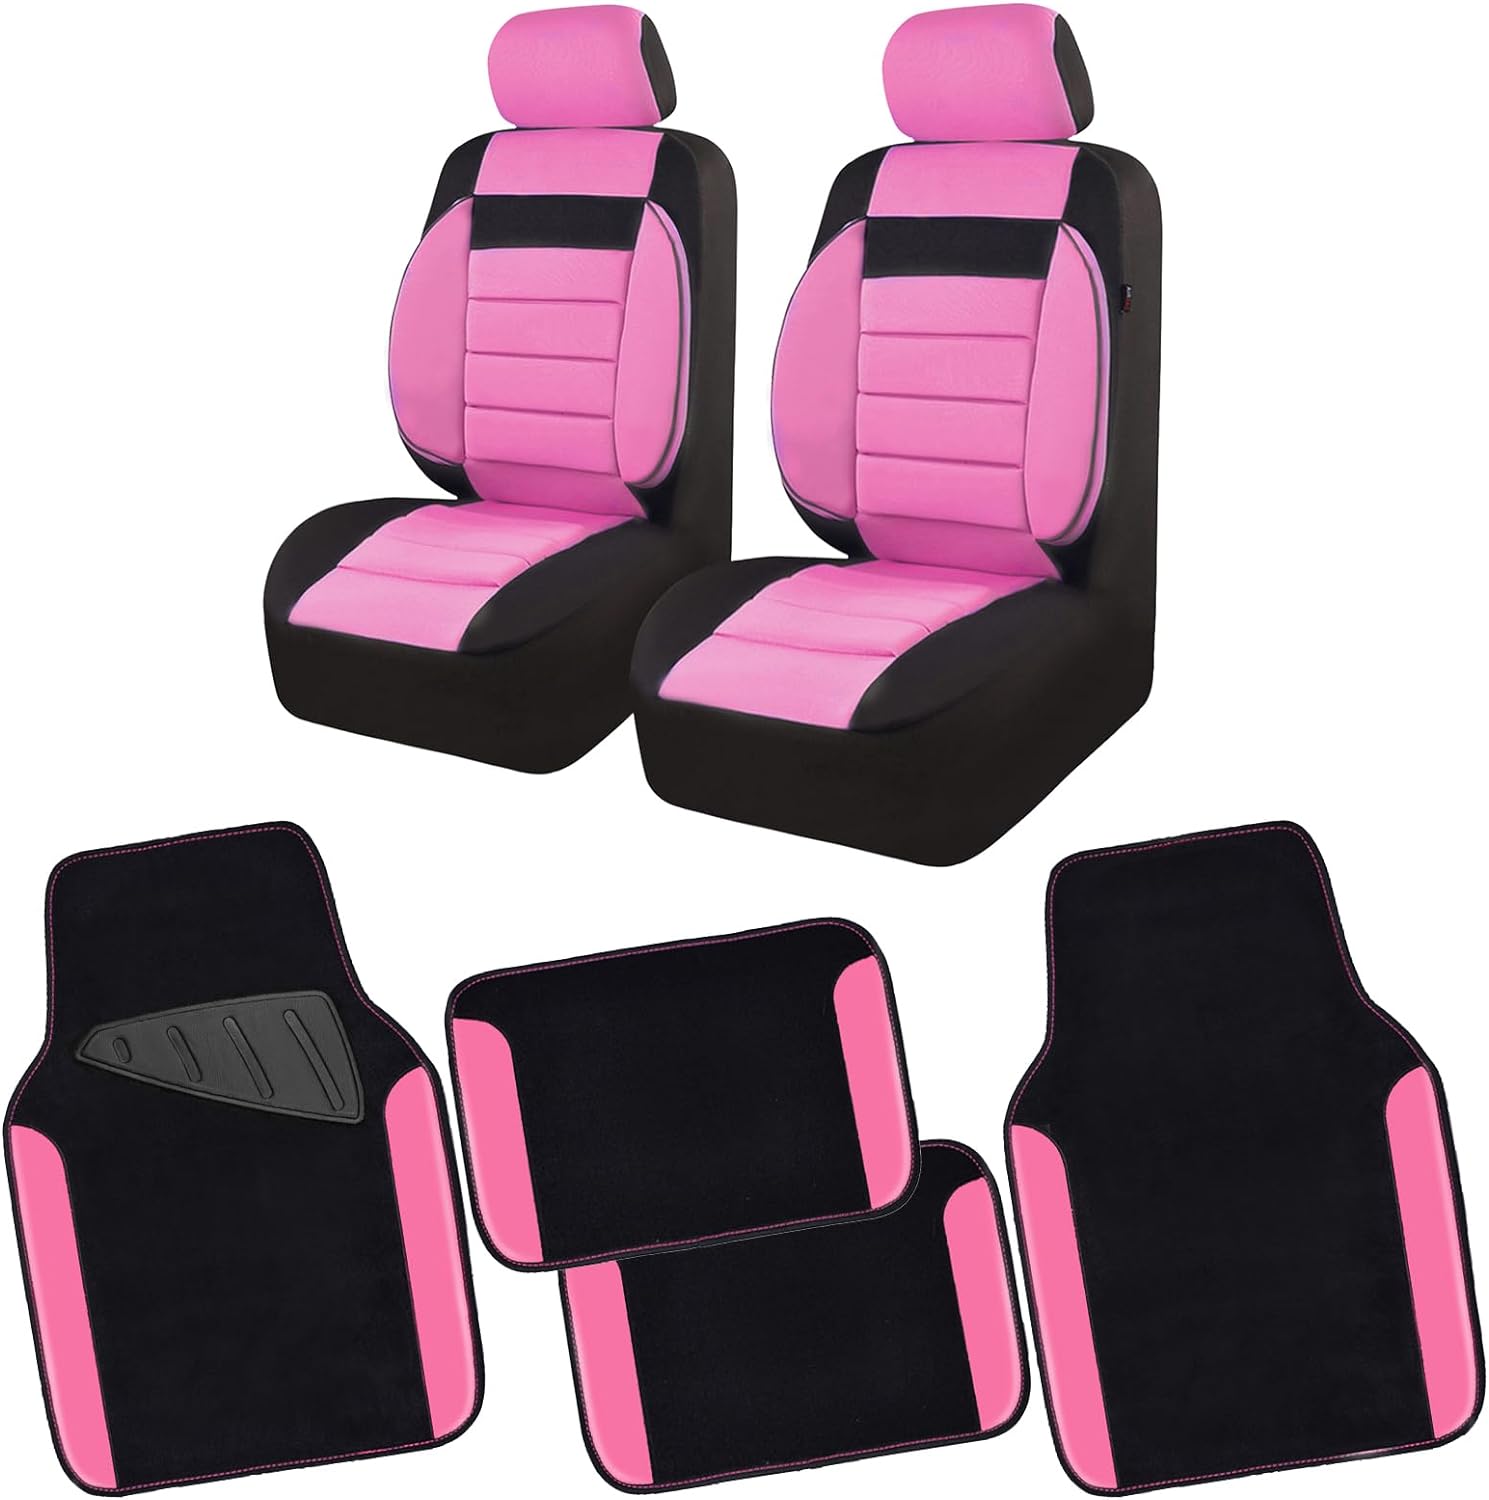 CAR PASS 6PCS 3D Foam Cushion Back Support Universal Fit Elegance Car Seat Covers Front Seats Only & Car Mats for Automotive SUV,Van,saden,Trucks Airbag Compatible